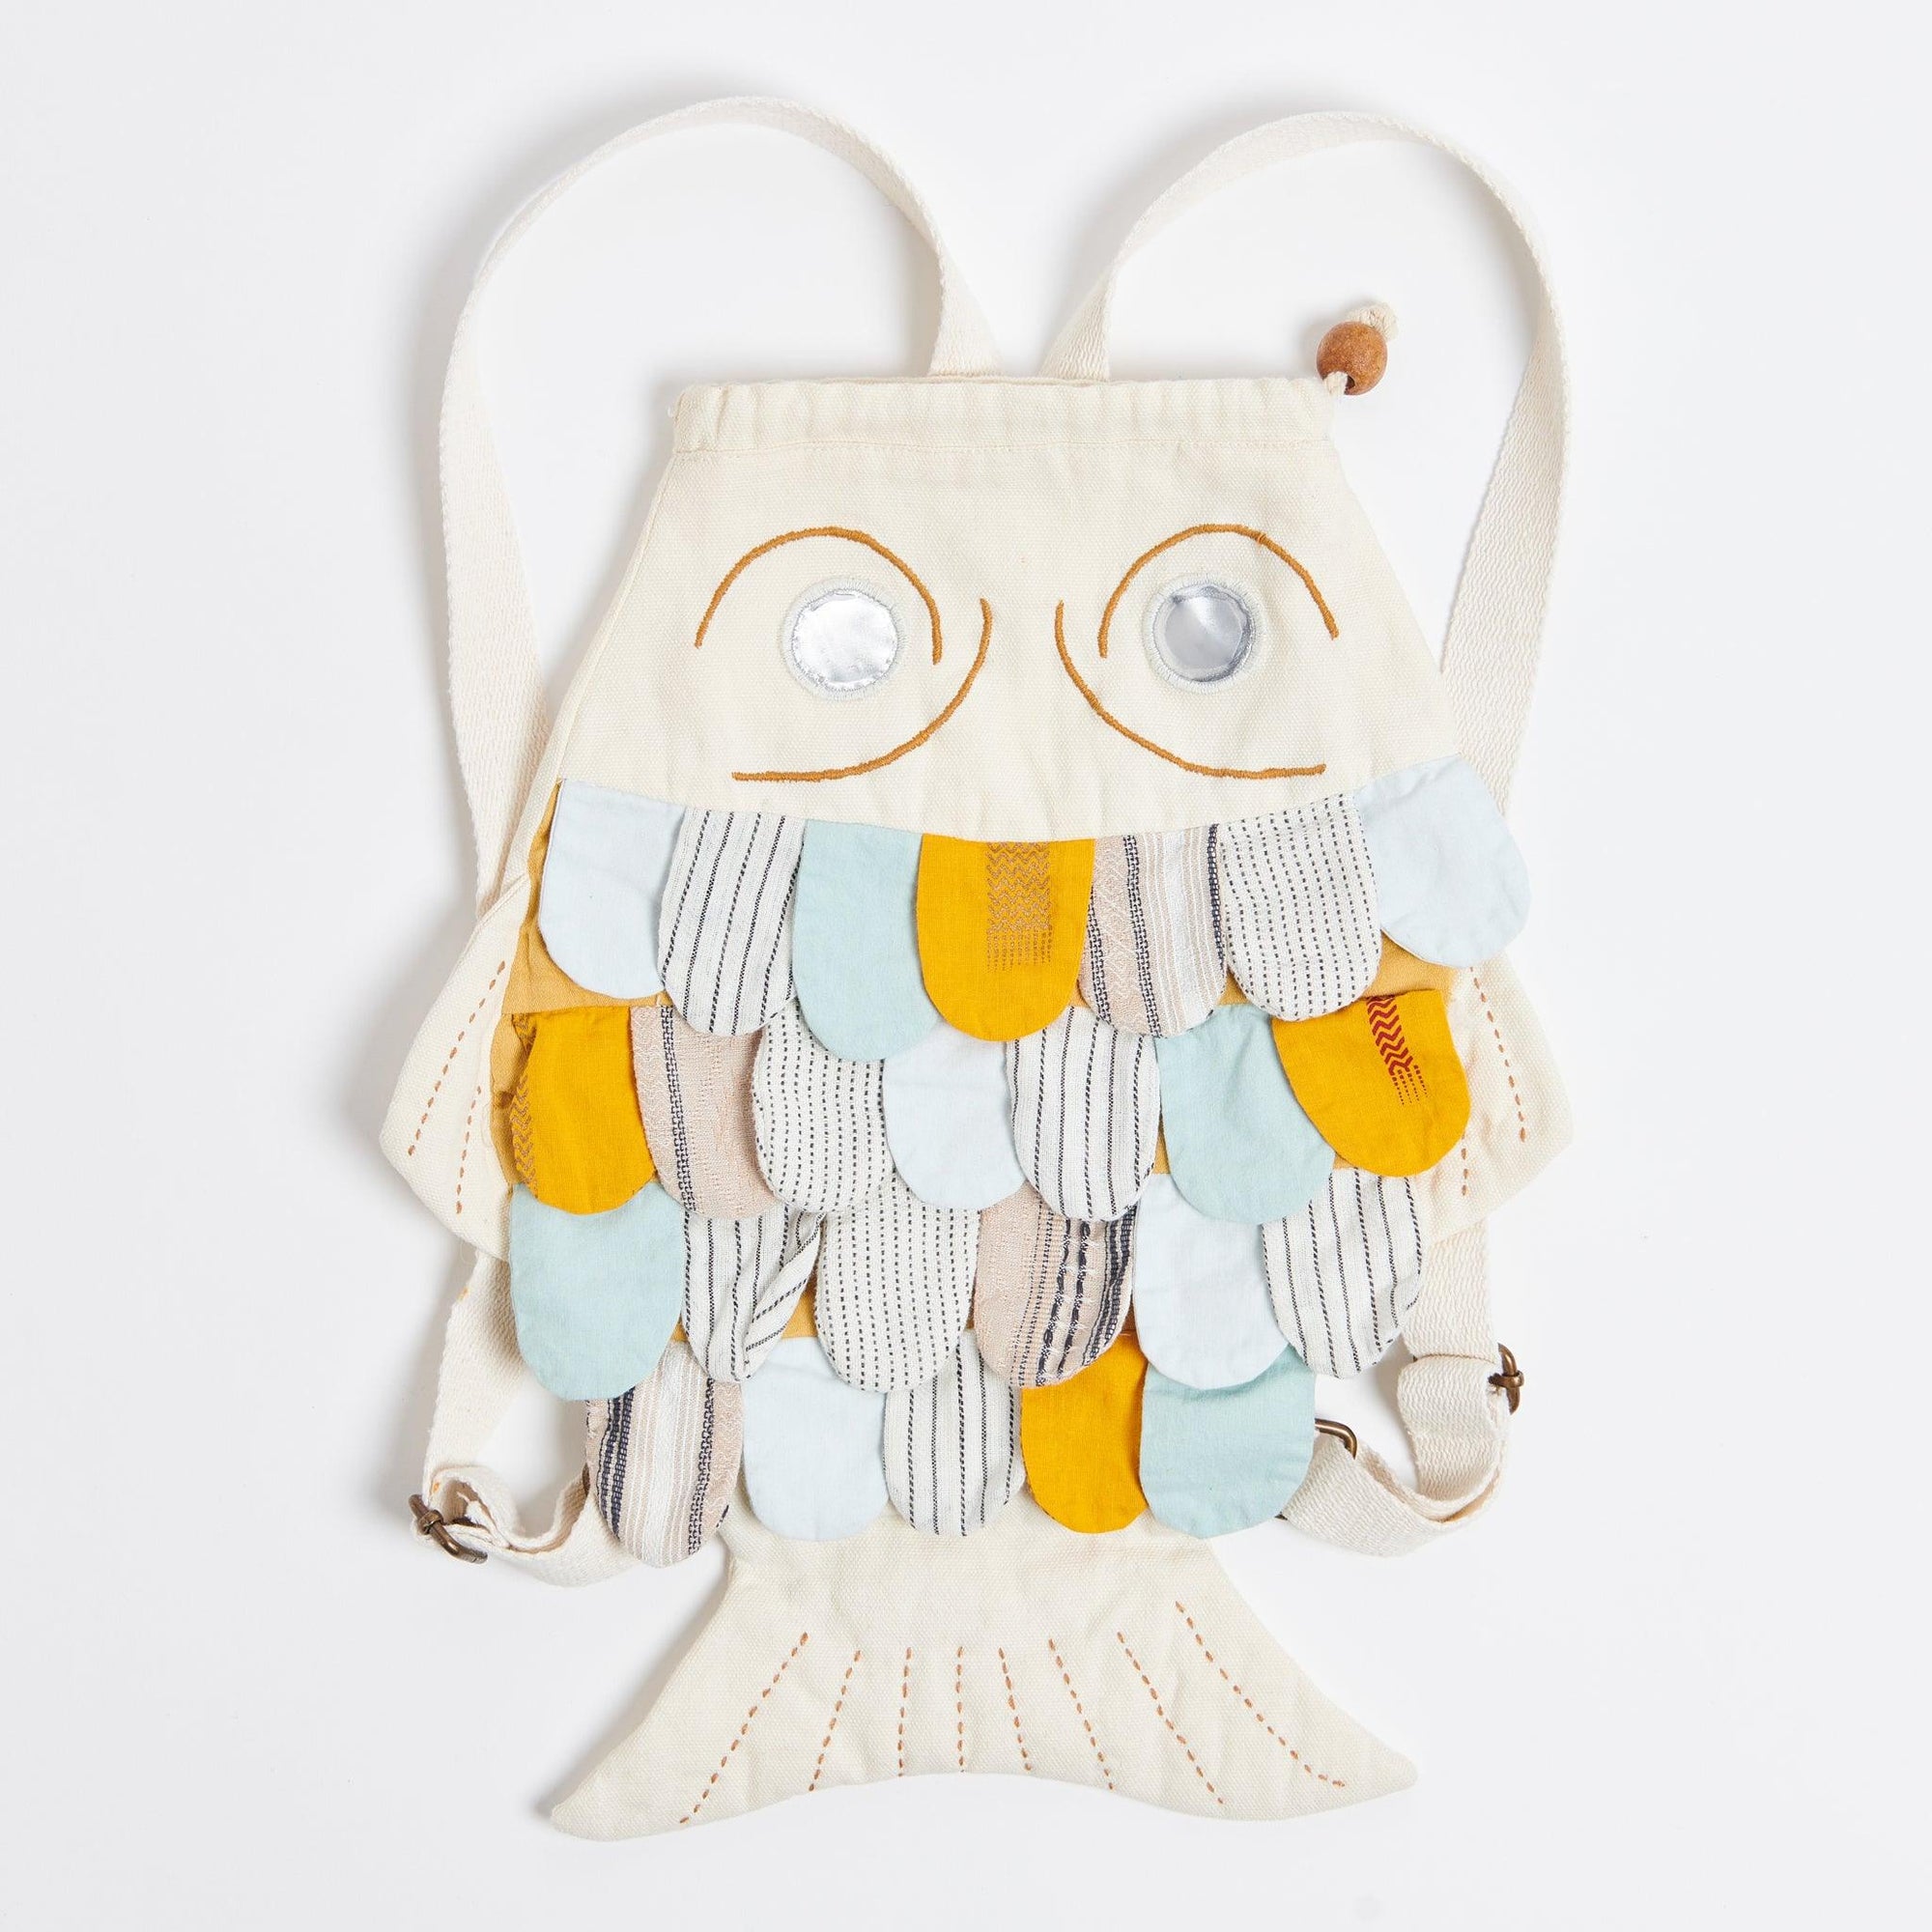 White fish shaped backpack on a white background. Fish has mettalic eyes and scales made out of patchwork fabrics